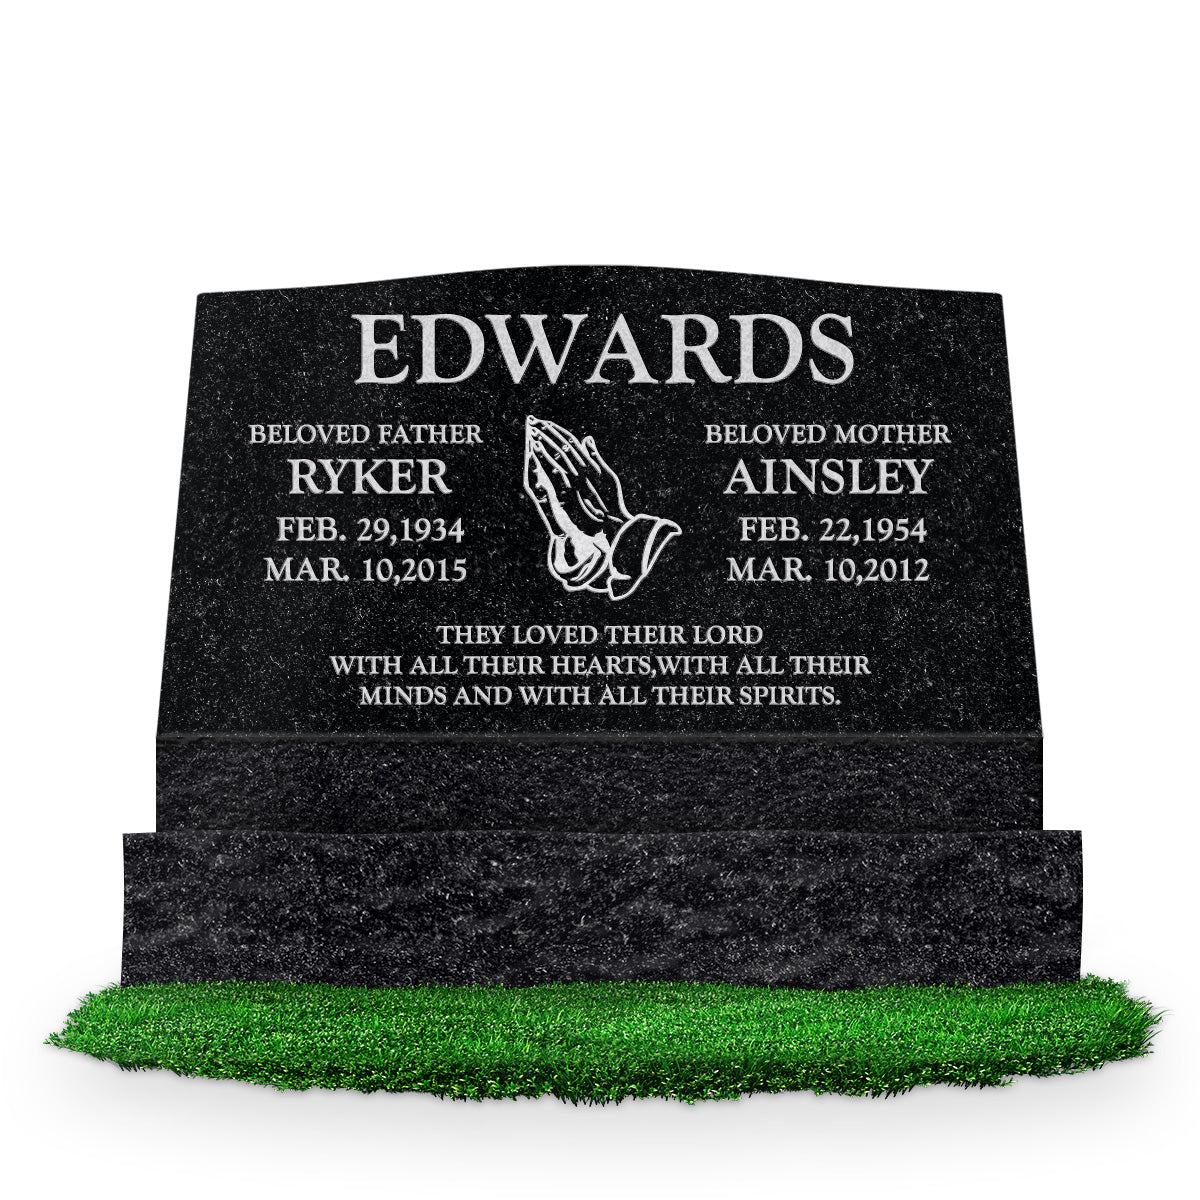 30″ x 10″ x 16″ Serp Top Slant Headstone: polished front and back; 36″ base; Companion/Artwork